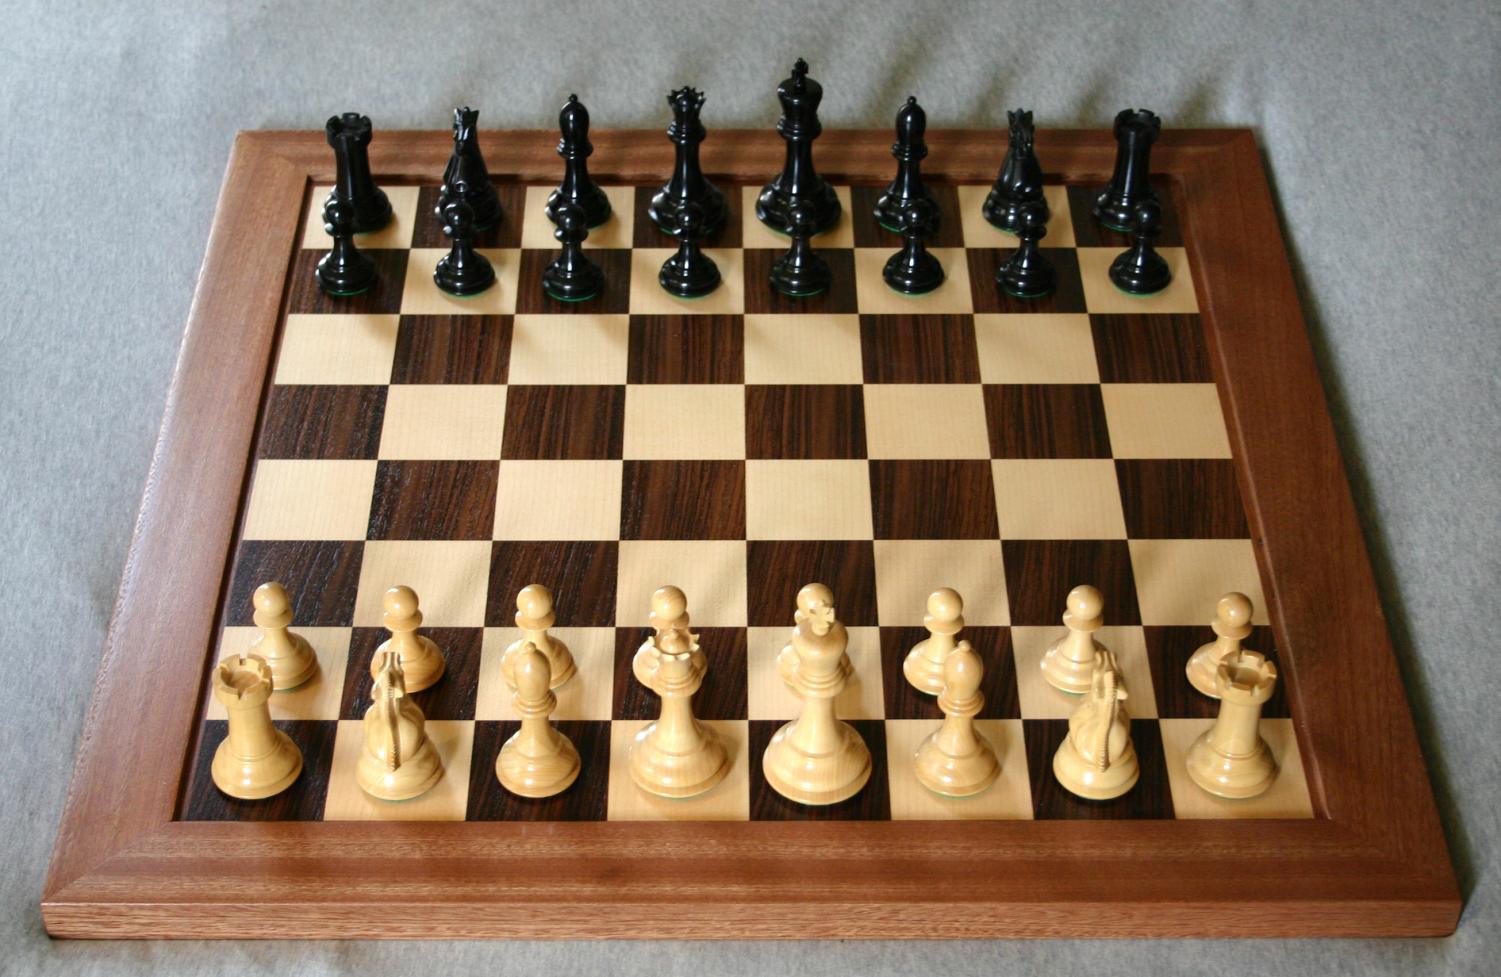 Play Chess for the NHS